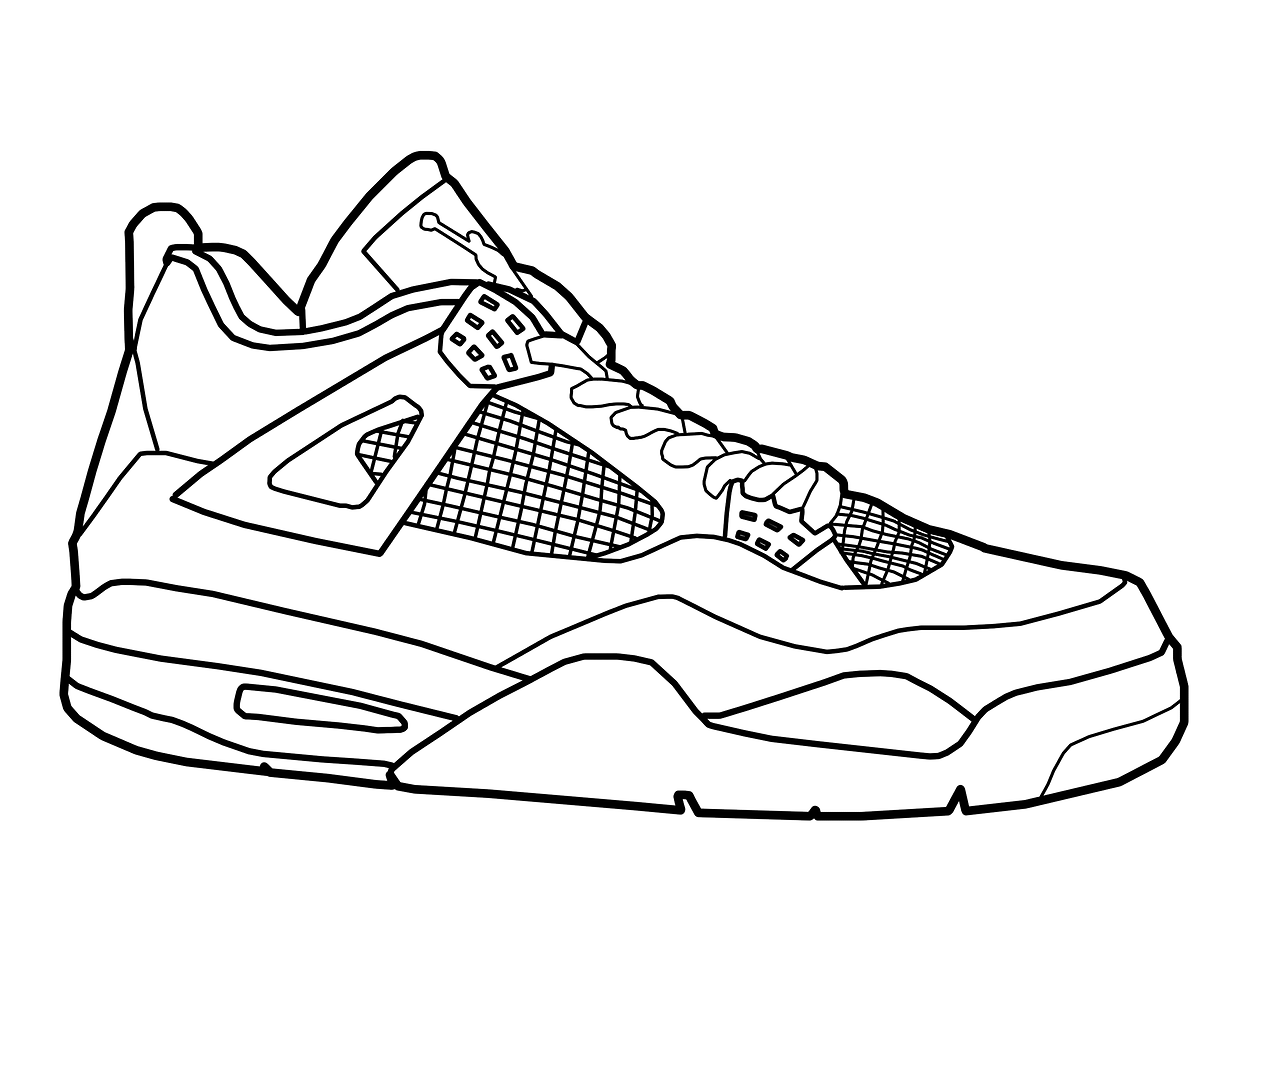 Jordan Shoe - Coloring Pages for Kids and for Adults